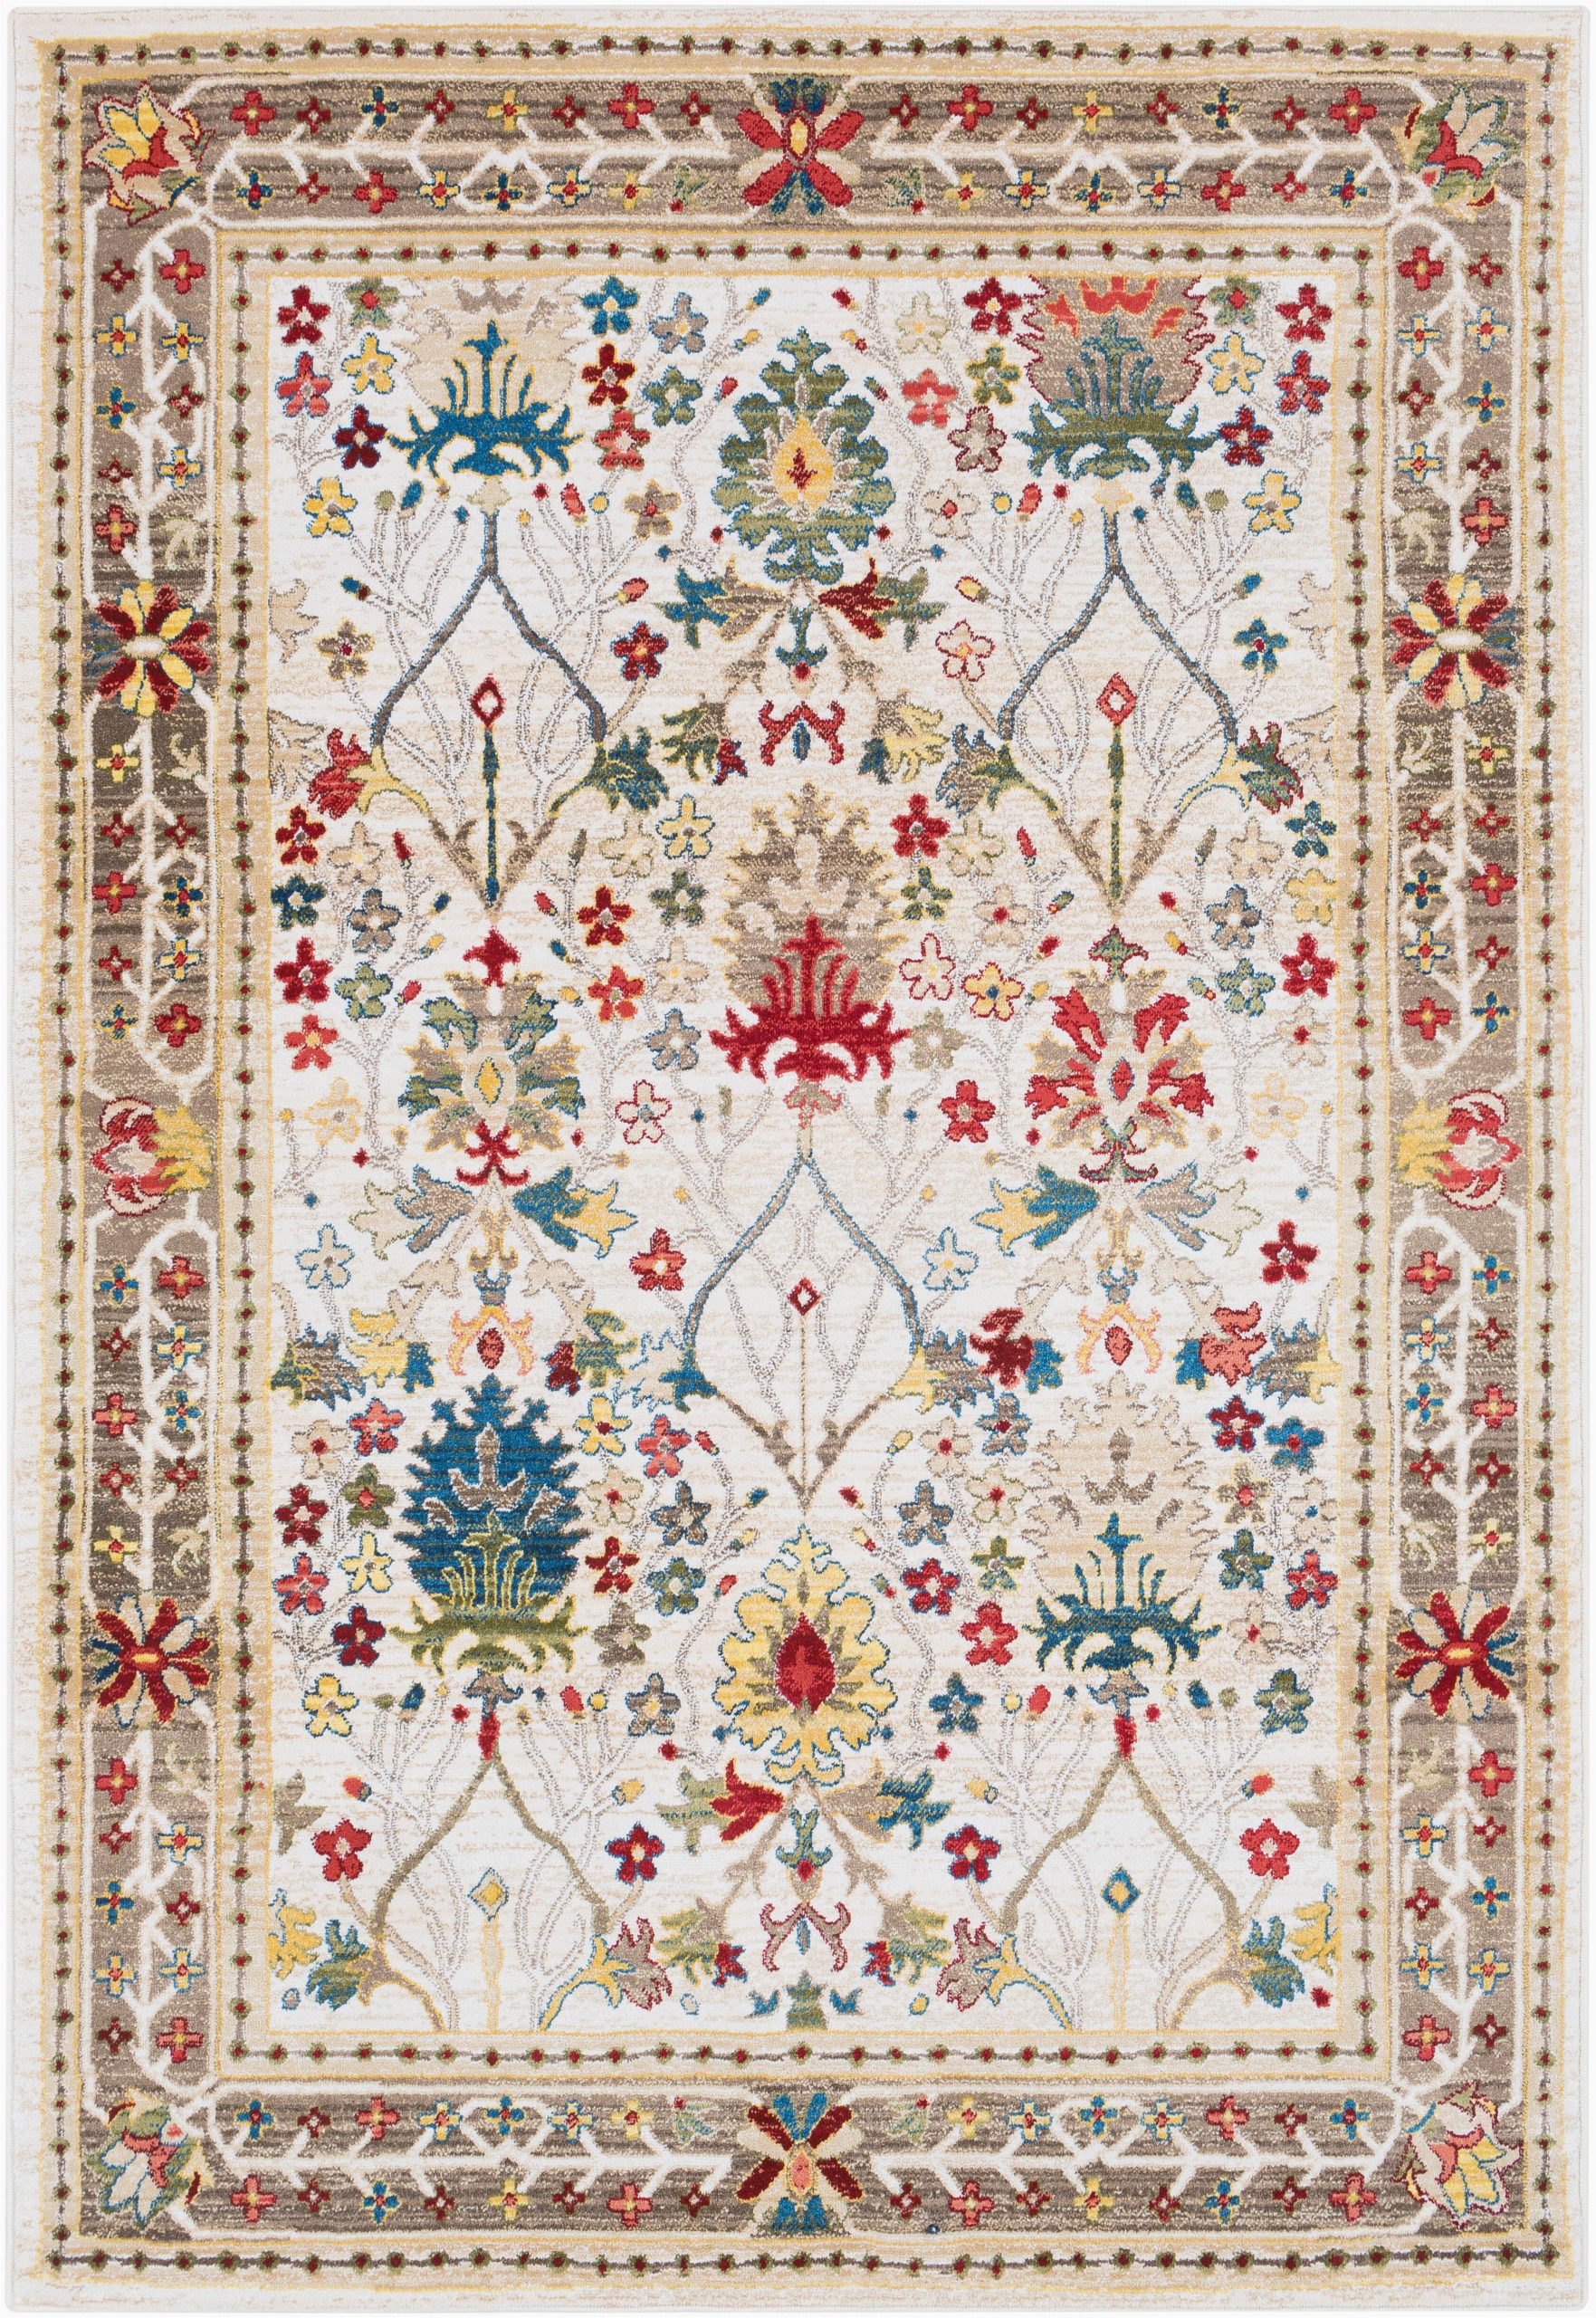 Cream and Red area Rugs Arbouet Traditional Floral Dark Red Cream area Rug